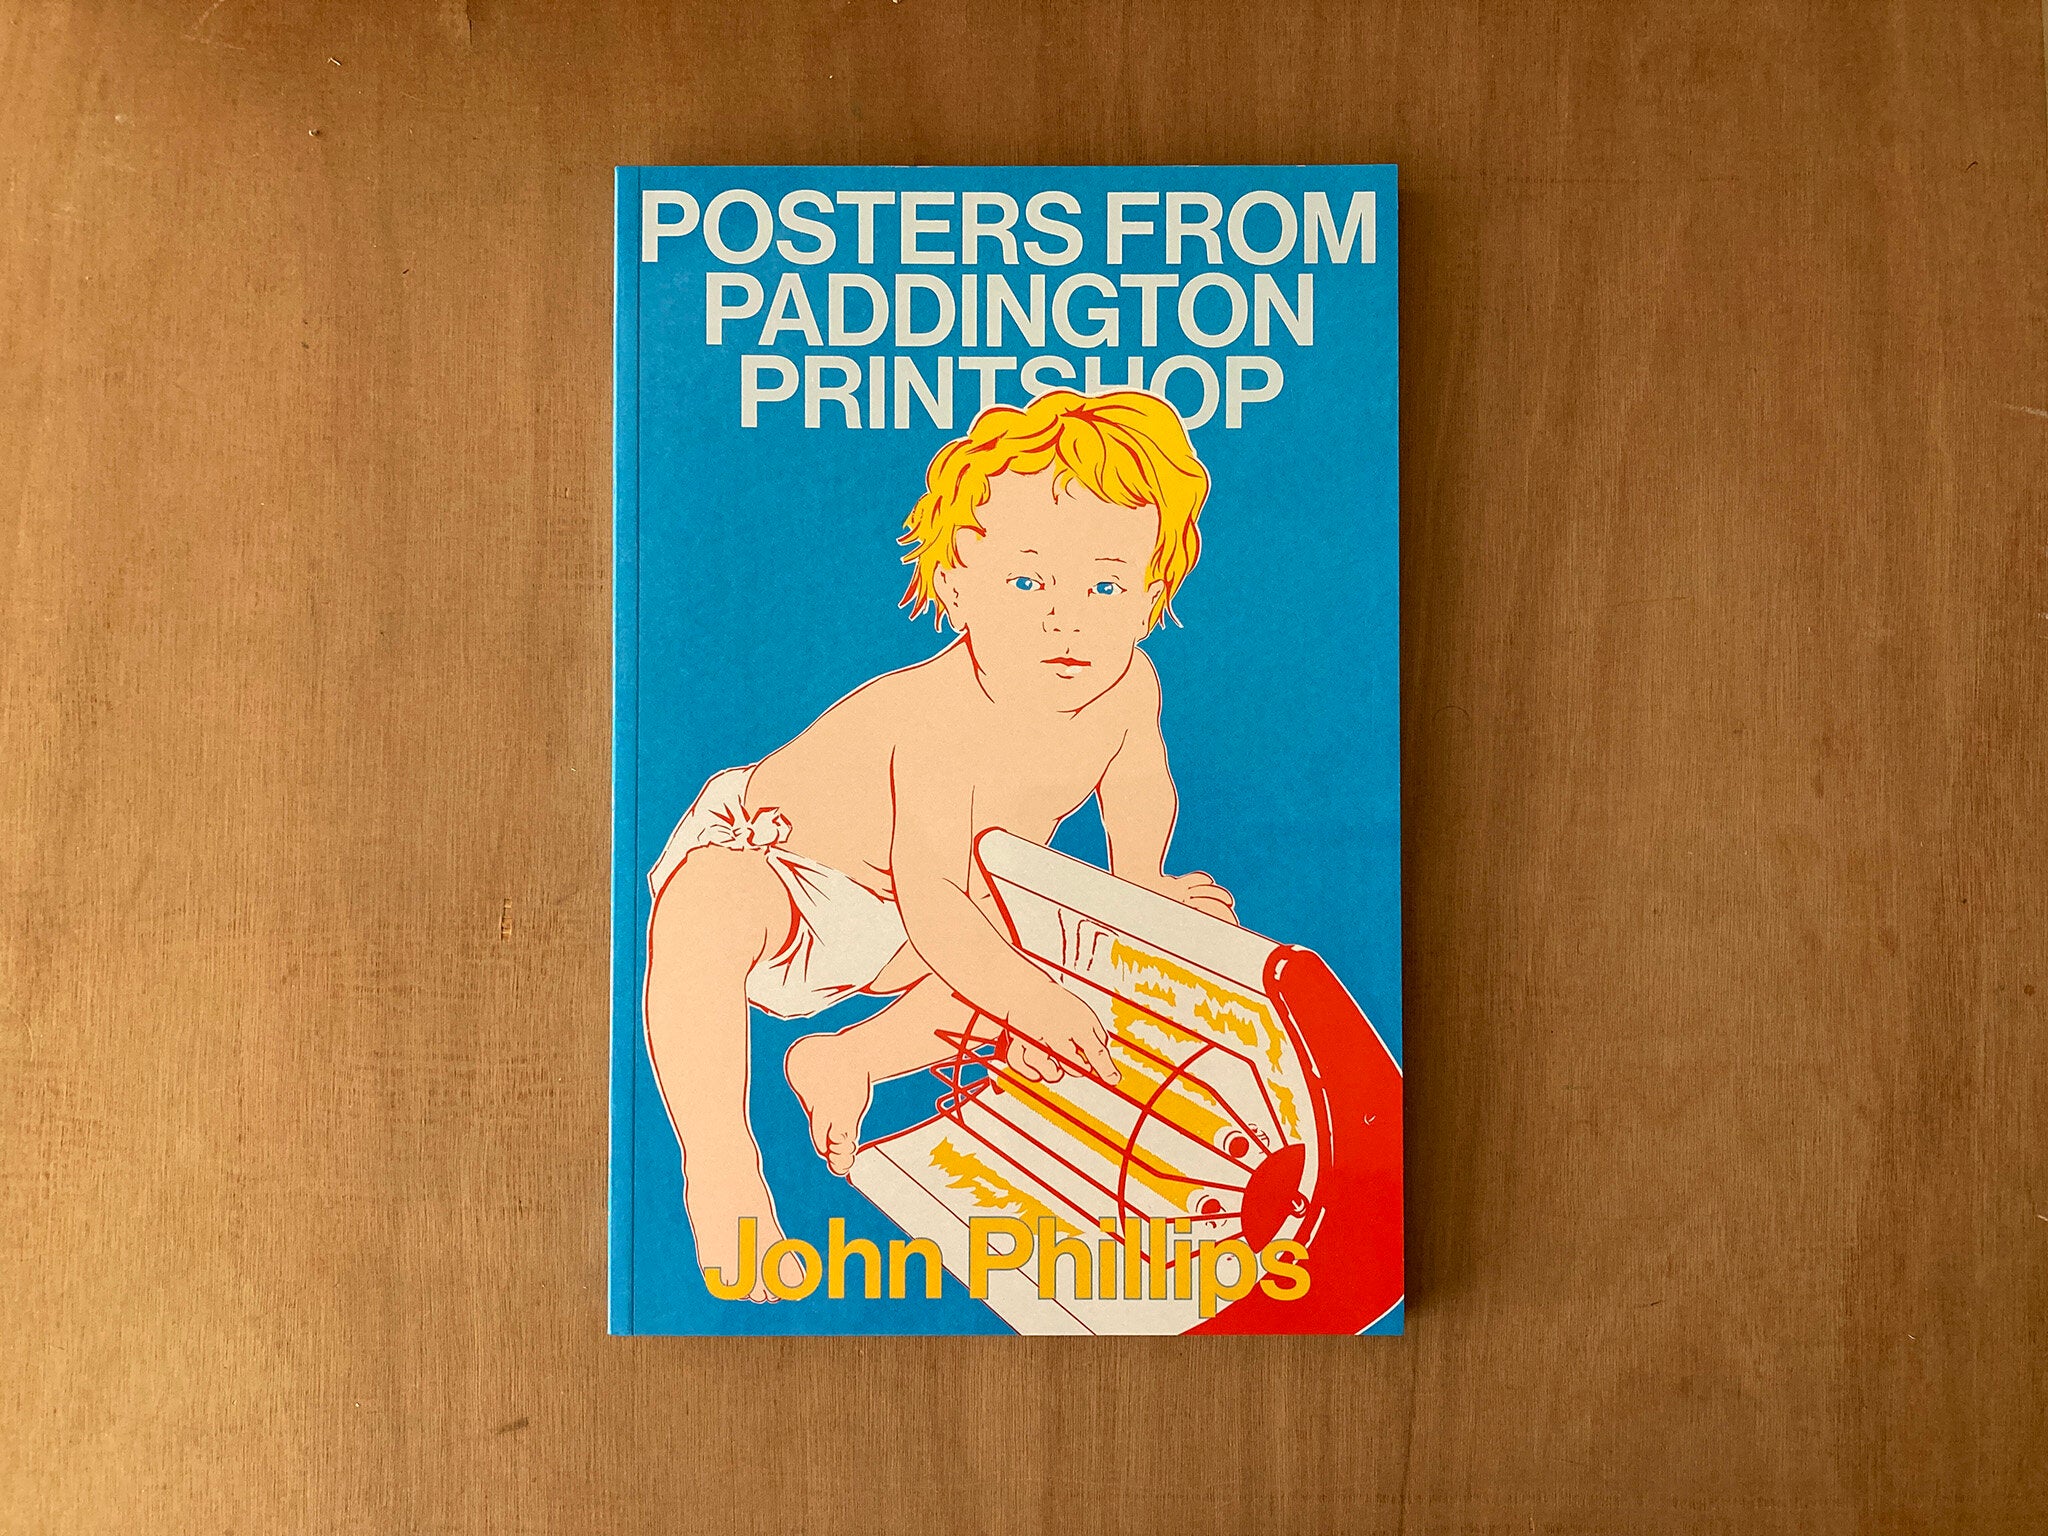 POSTERS FROM PADDINGTON PRINTSHOP by John Phillips